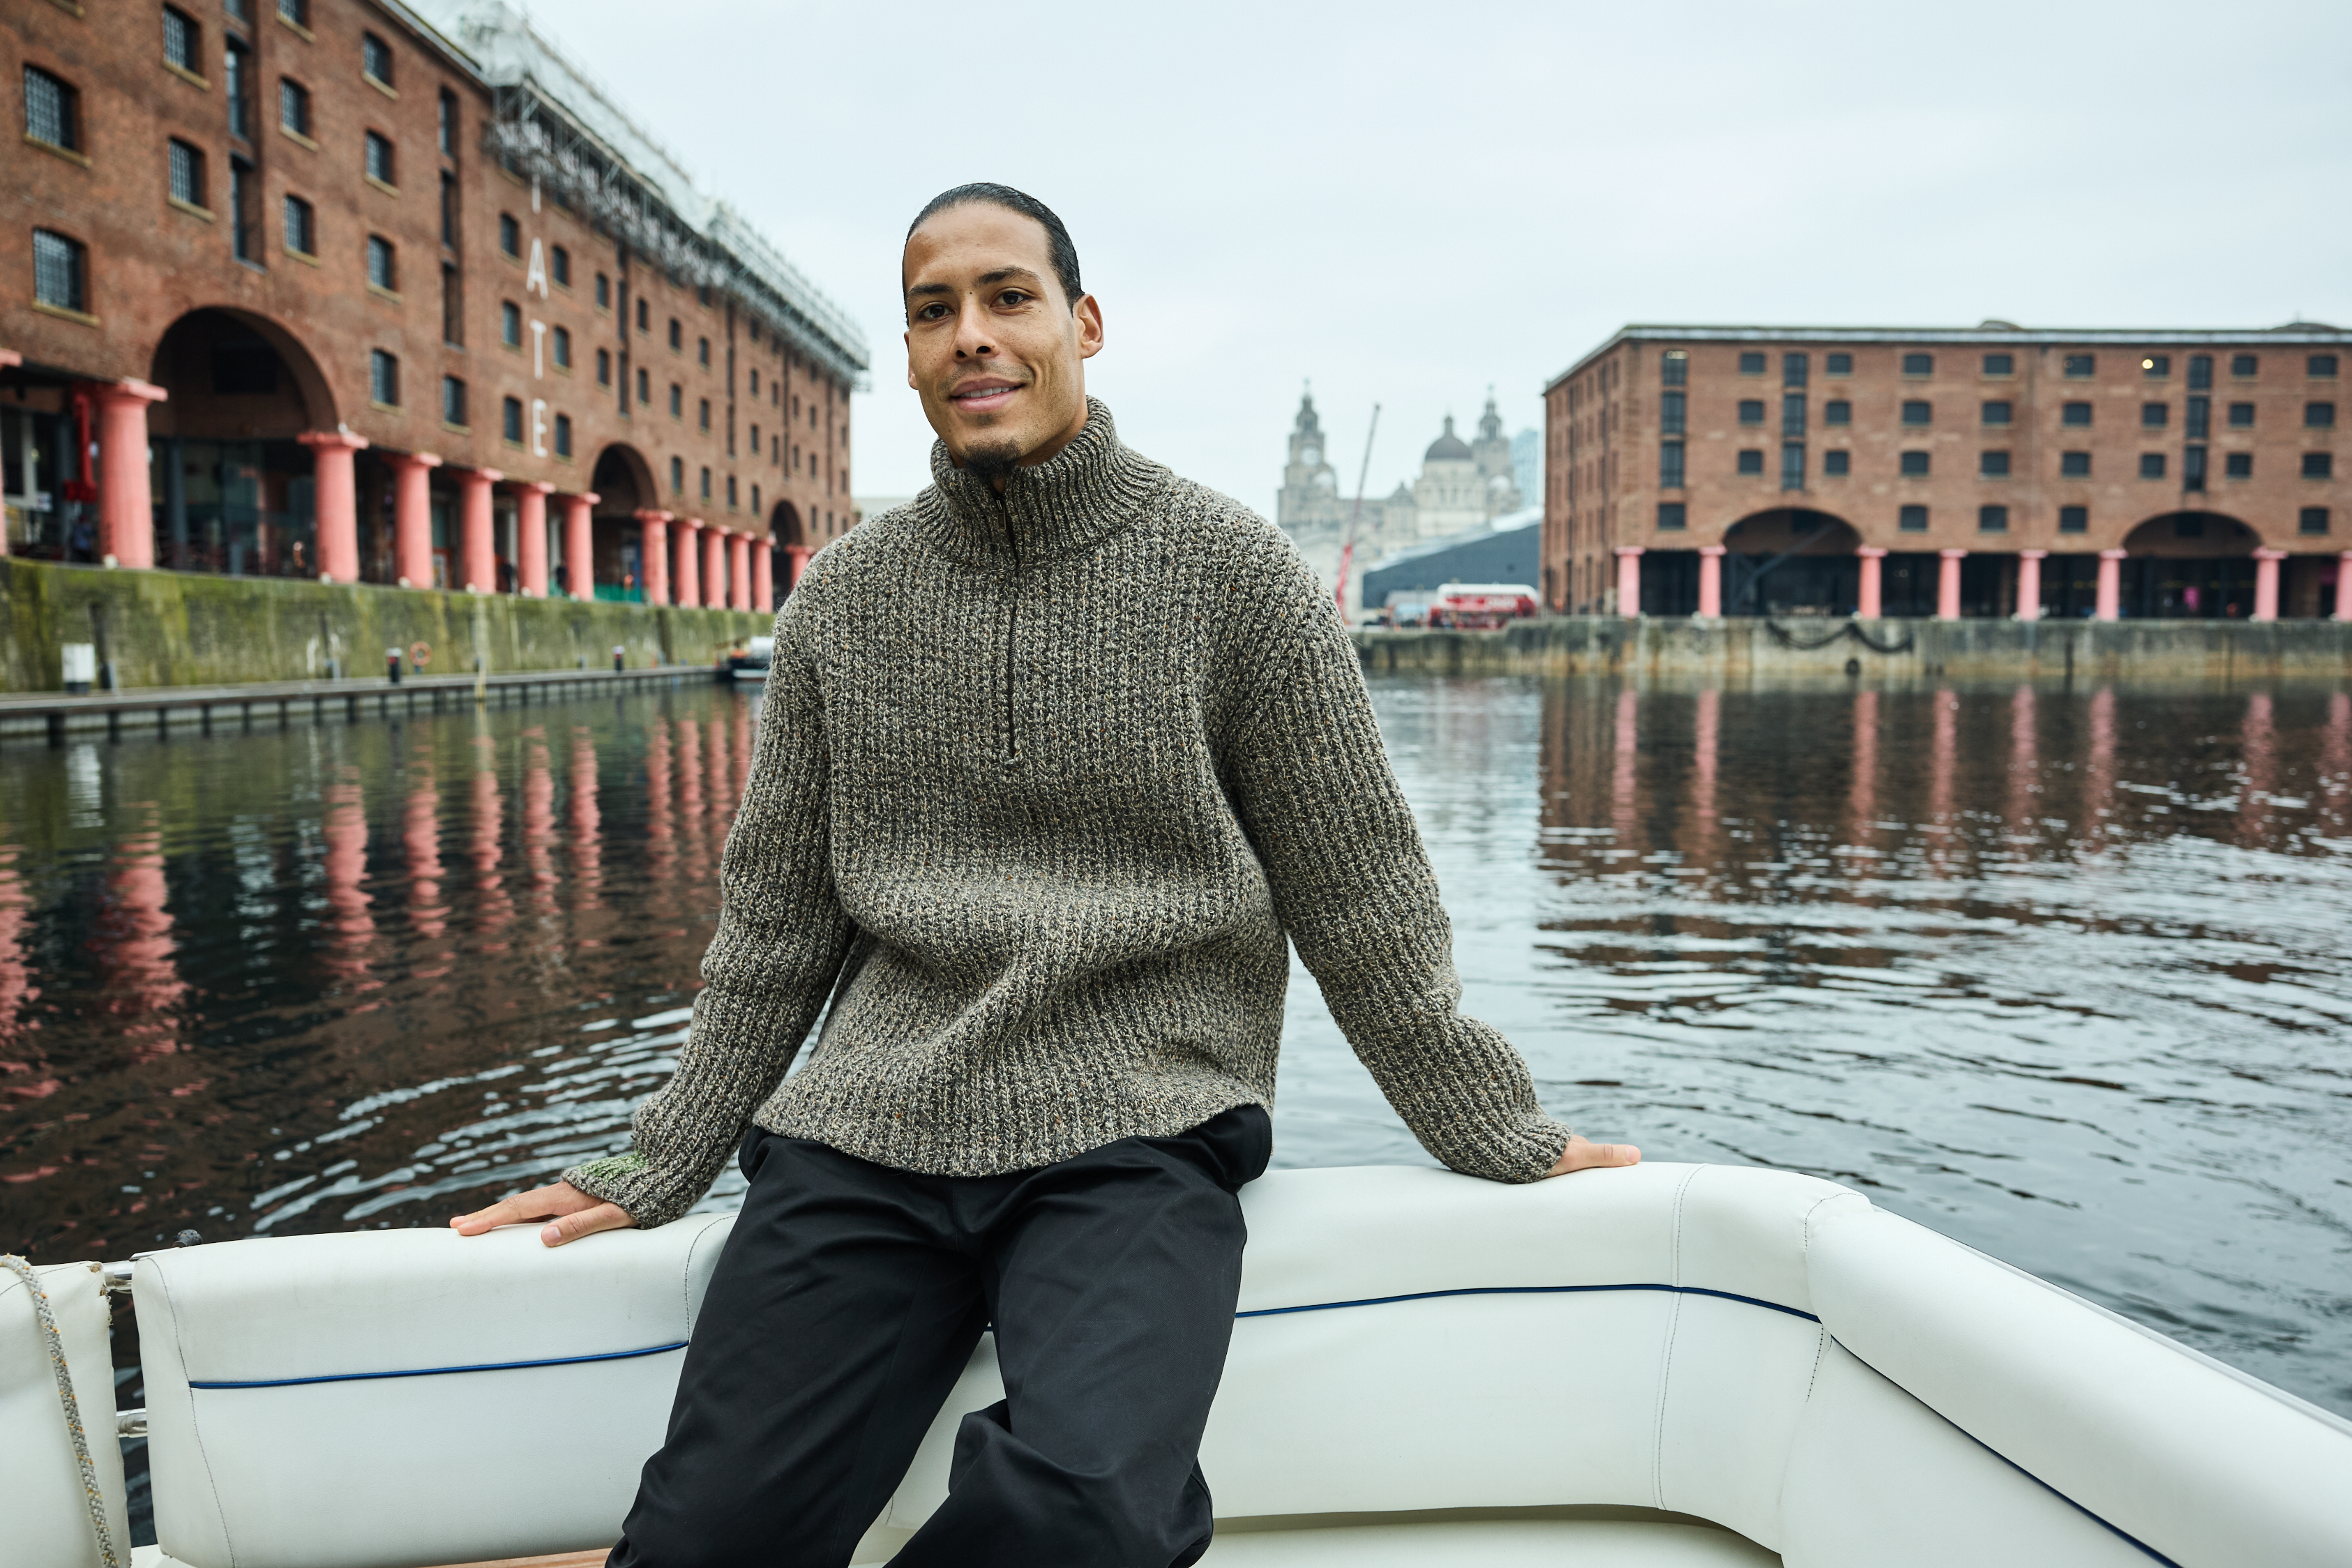 Man in a sweater seated on a boat with historical buildings in the background